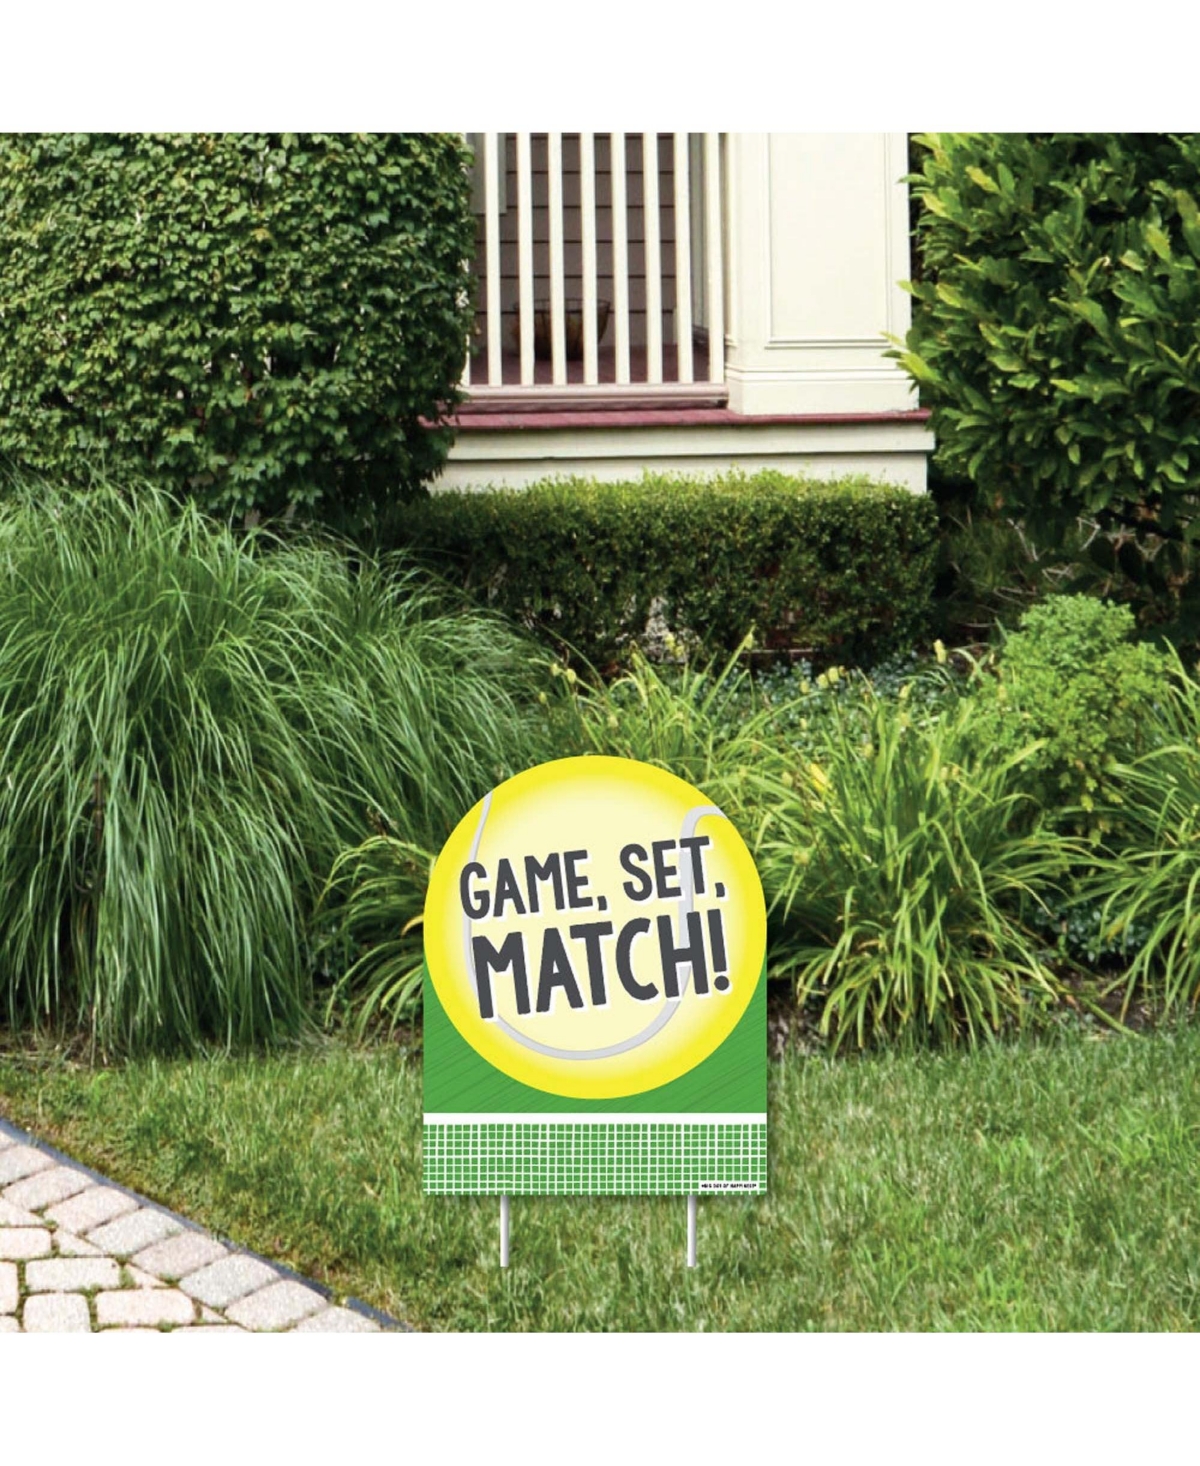 You Got Served - Tennis - Outdoor Lawn Sign - Party Yard Sign - 1 Pc